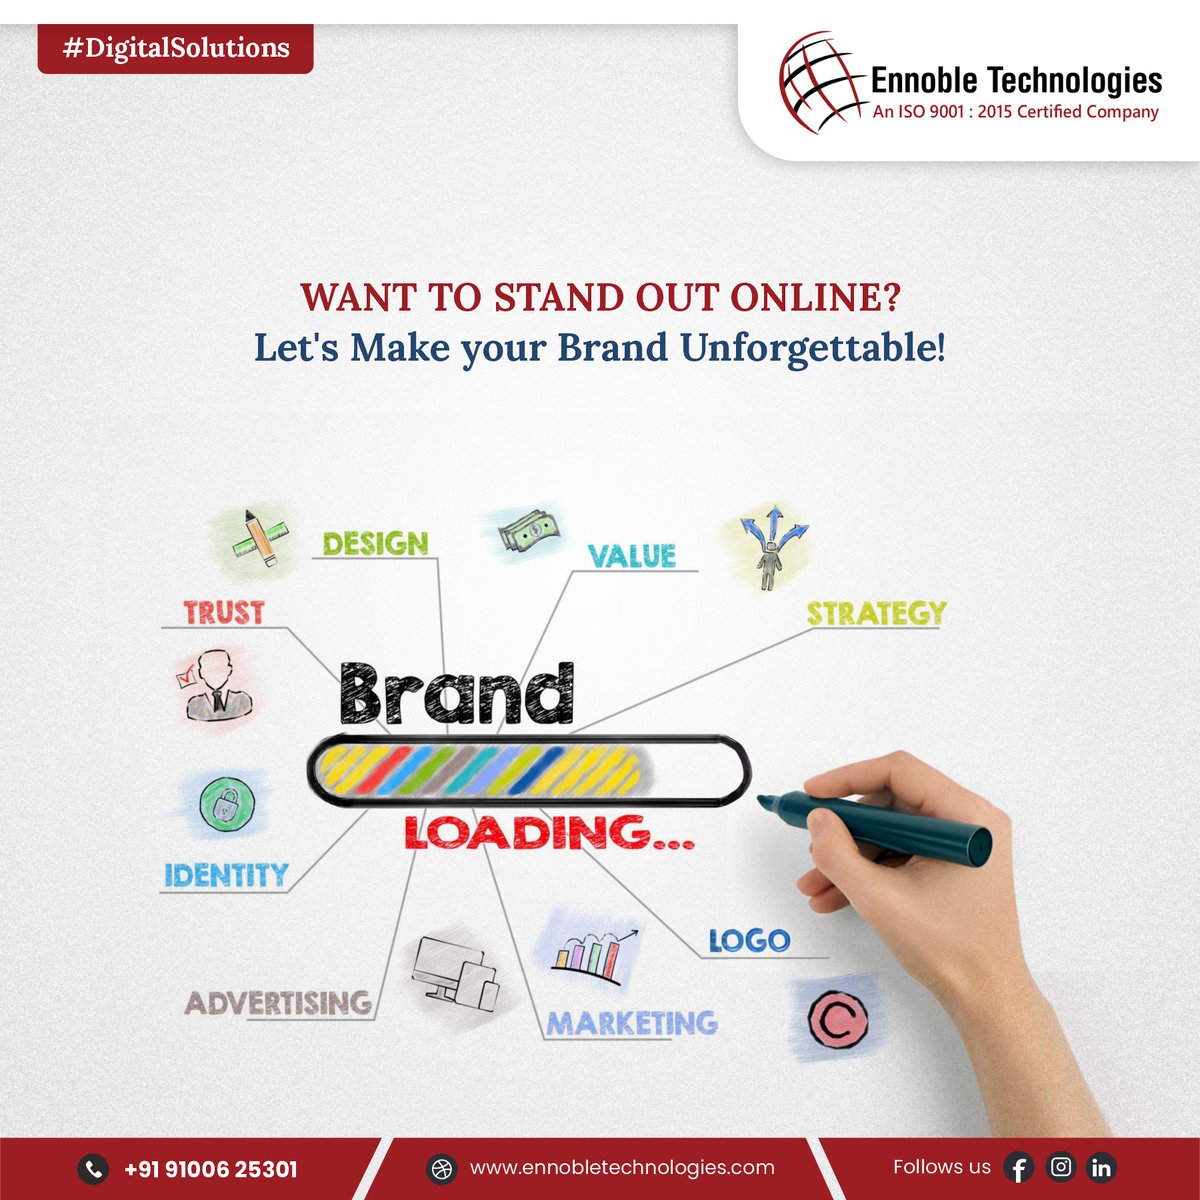 Want to stand out online?

Let's make your brand unforgettable! #EnnobleTechnologies crafts bespoke digital solutions tailored to your unique needs. Be distinct, be memorable, be unstoppable with us!

☎️Tel: +91-9100625301
📧Email us: info@ennobletechnologies.com